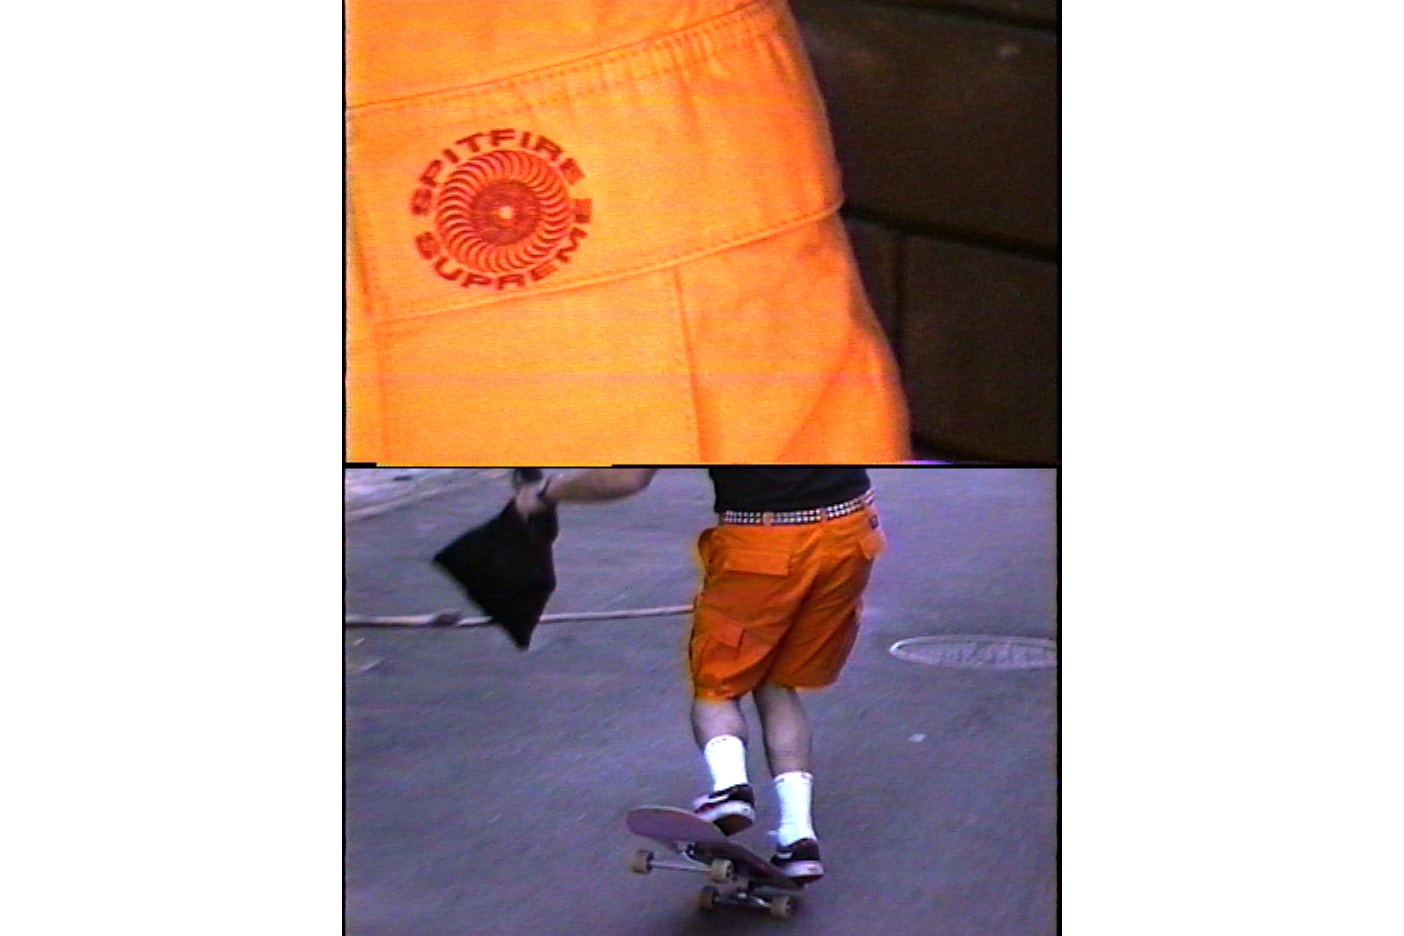 Supreme x Spitfire Spring 2018 Collection Skateboarding New York Sports Street Fashion Hoodies Tees Shorts Spring Summer